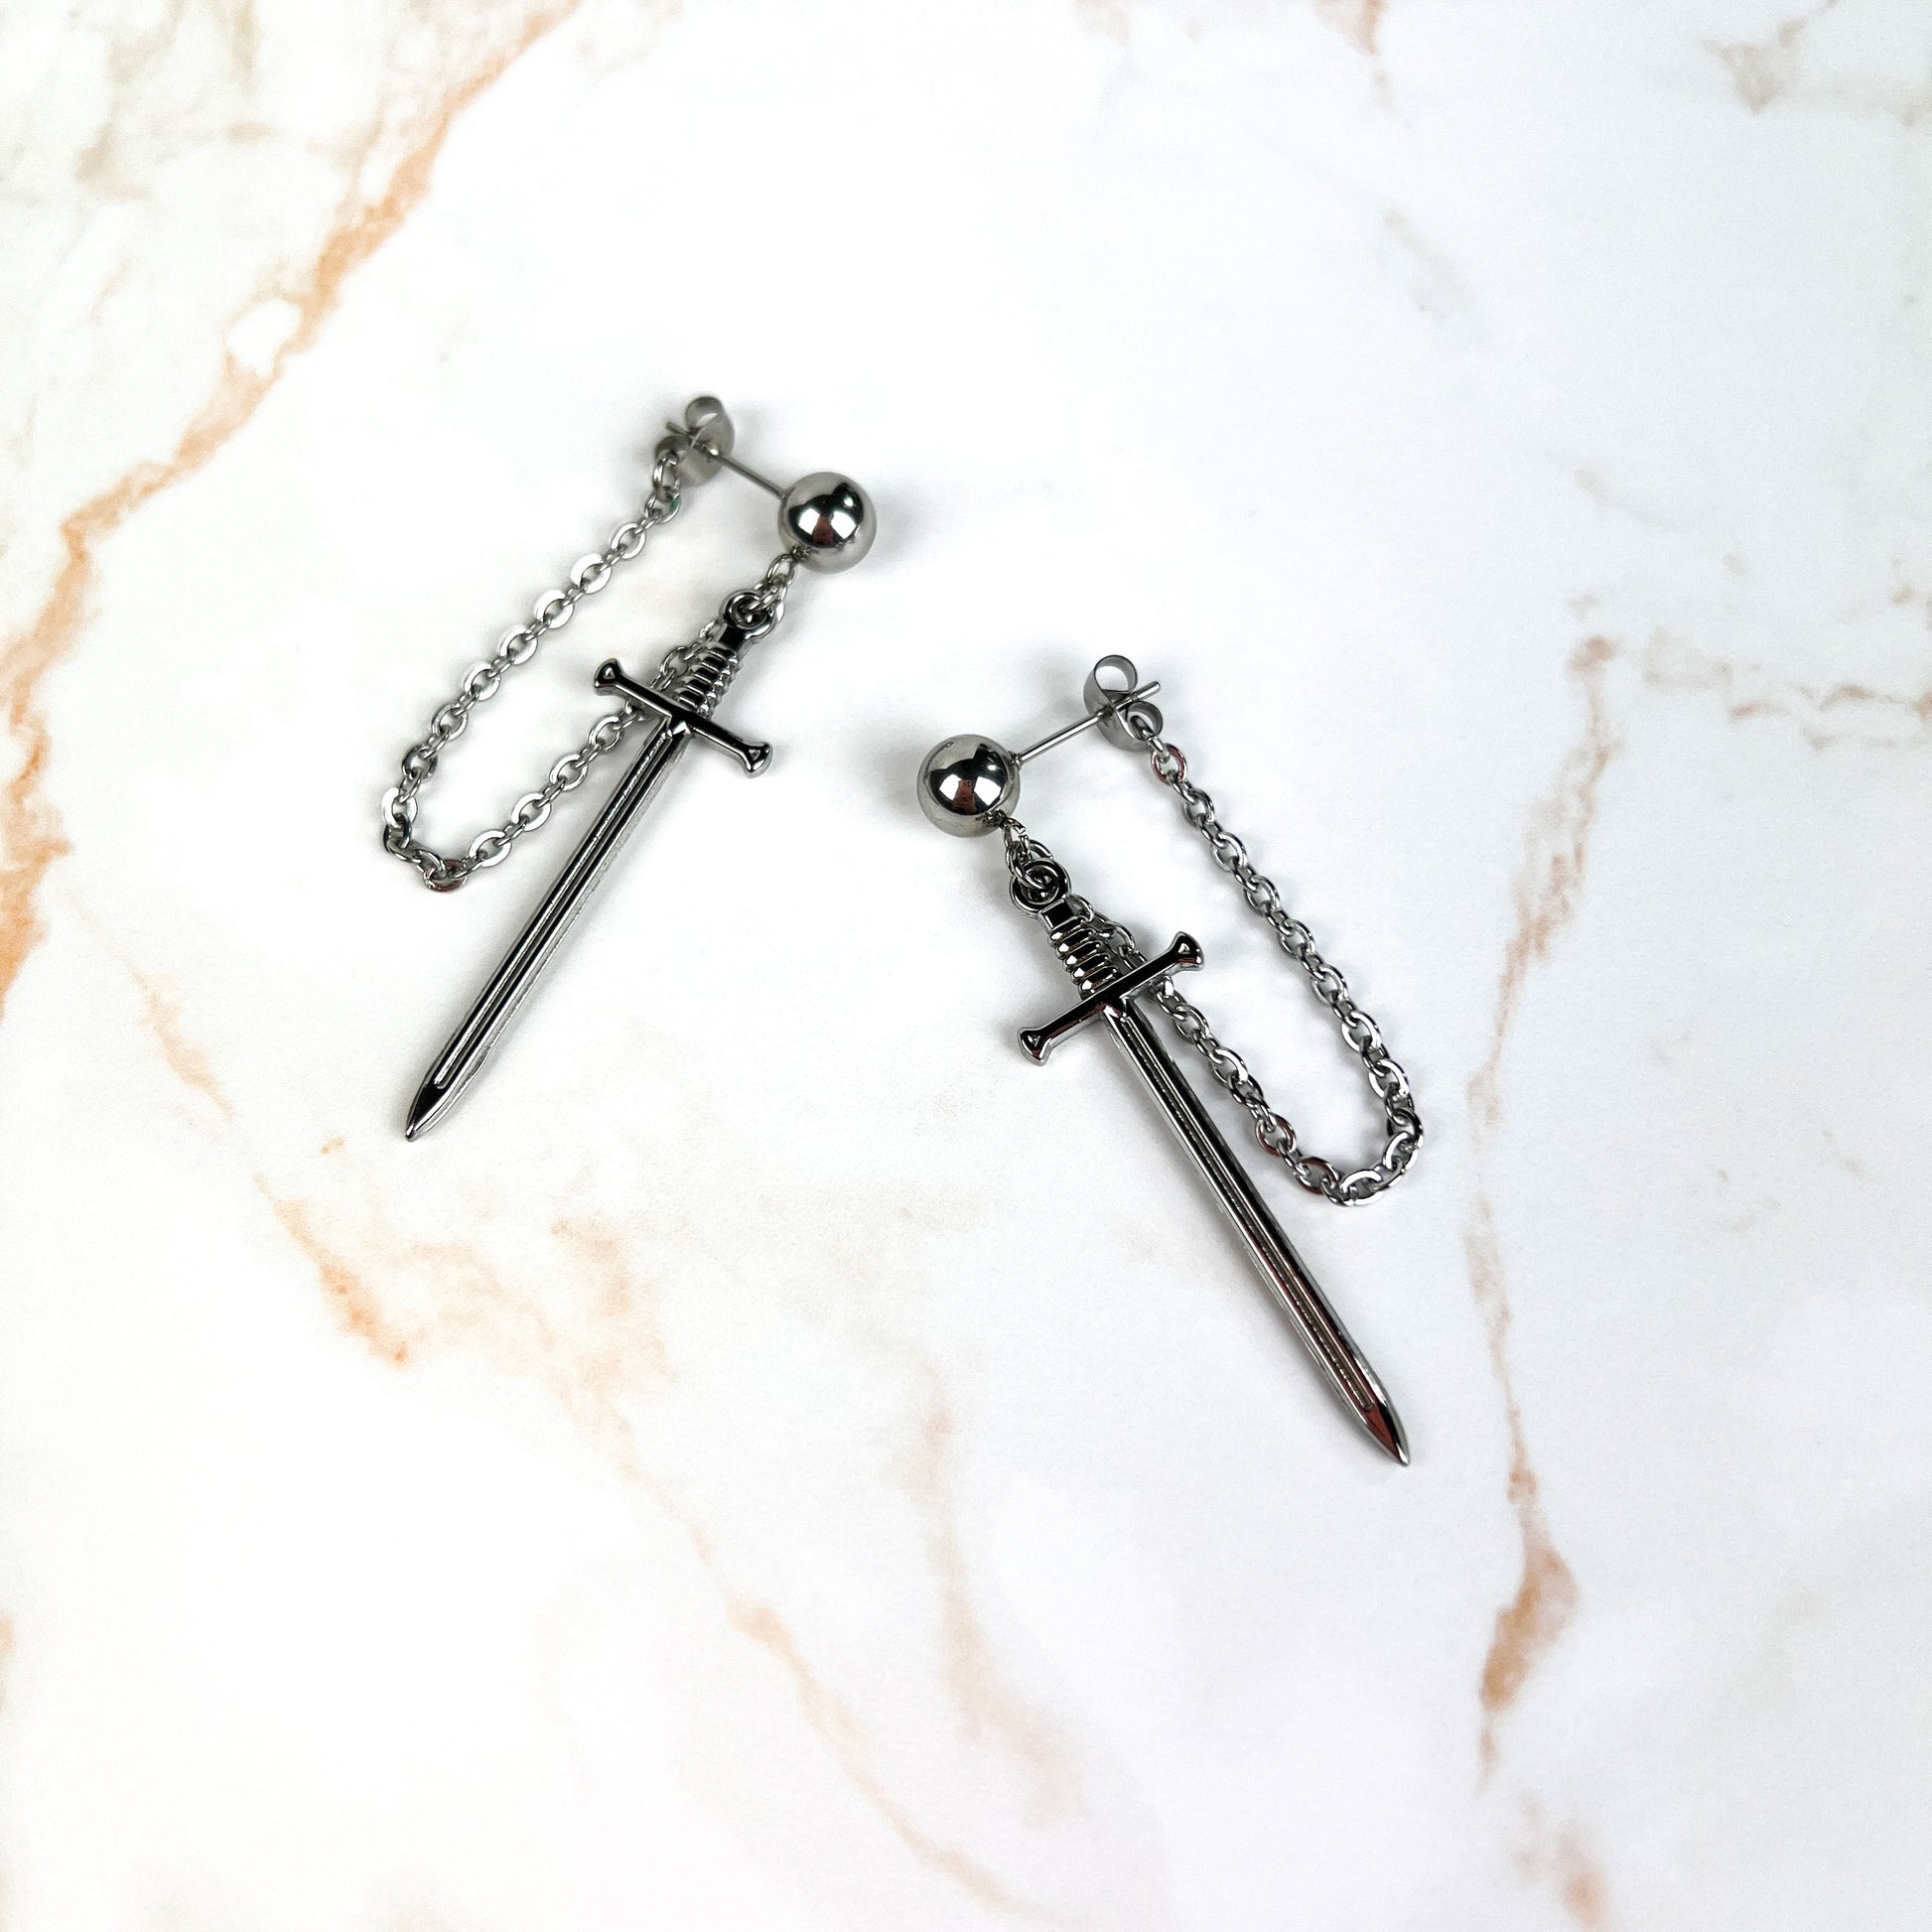 Swords and chains gothic medieval fantasy stainless steel earrings Baguette Magick